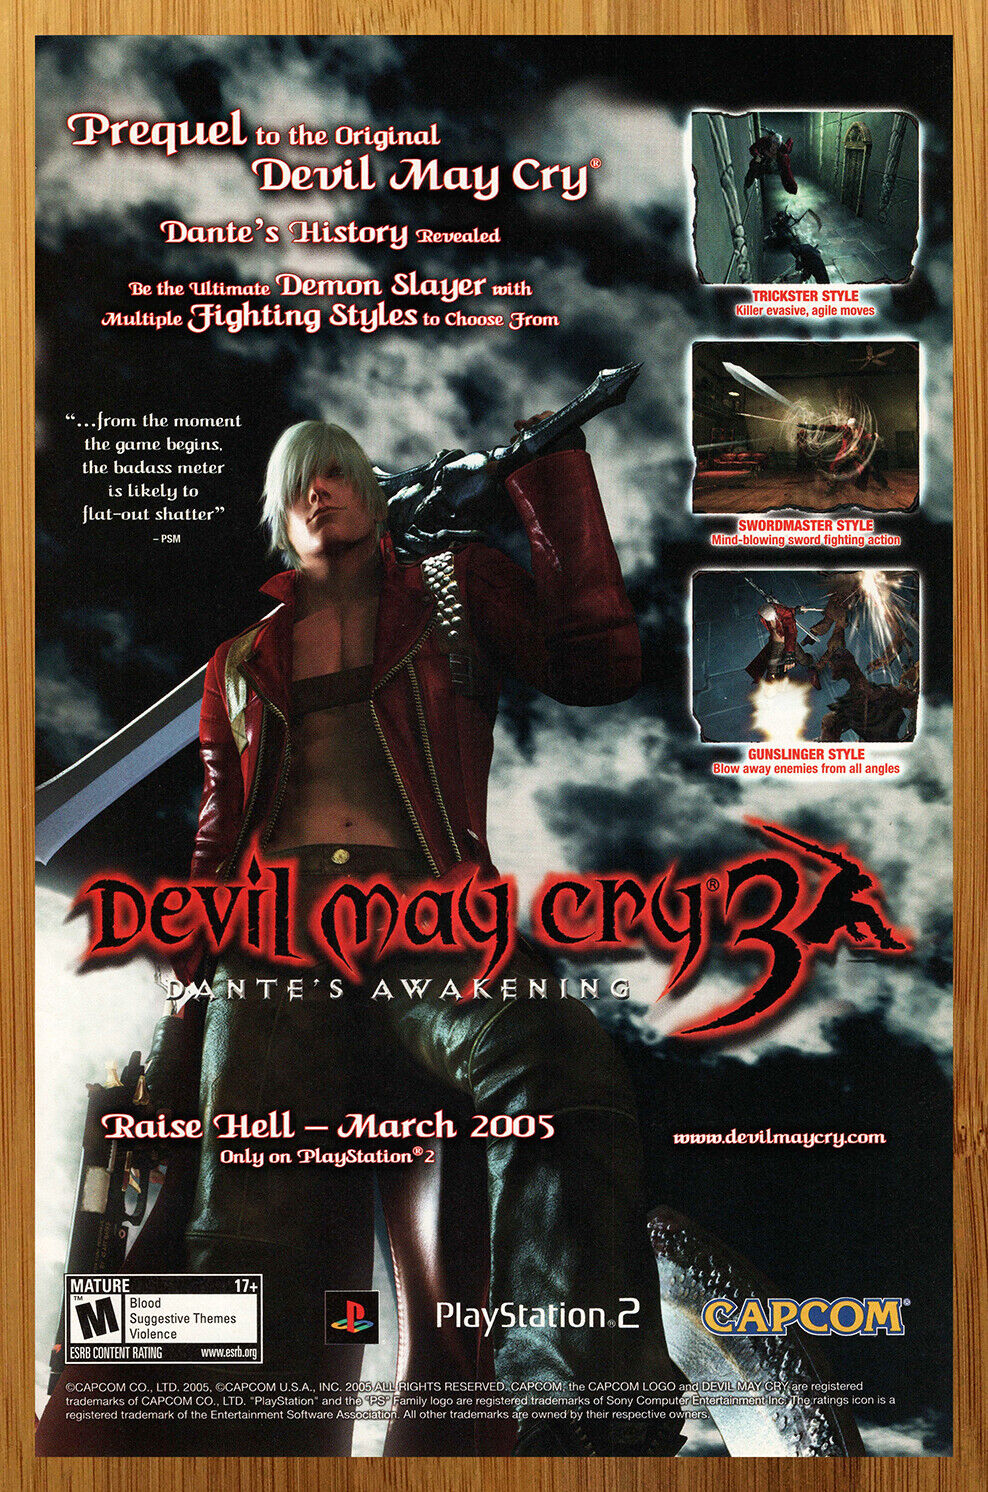 2005 Devil May Cry 3 Playstation 2 PS2 Vintage Print Ad/Poster Official Game Art